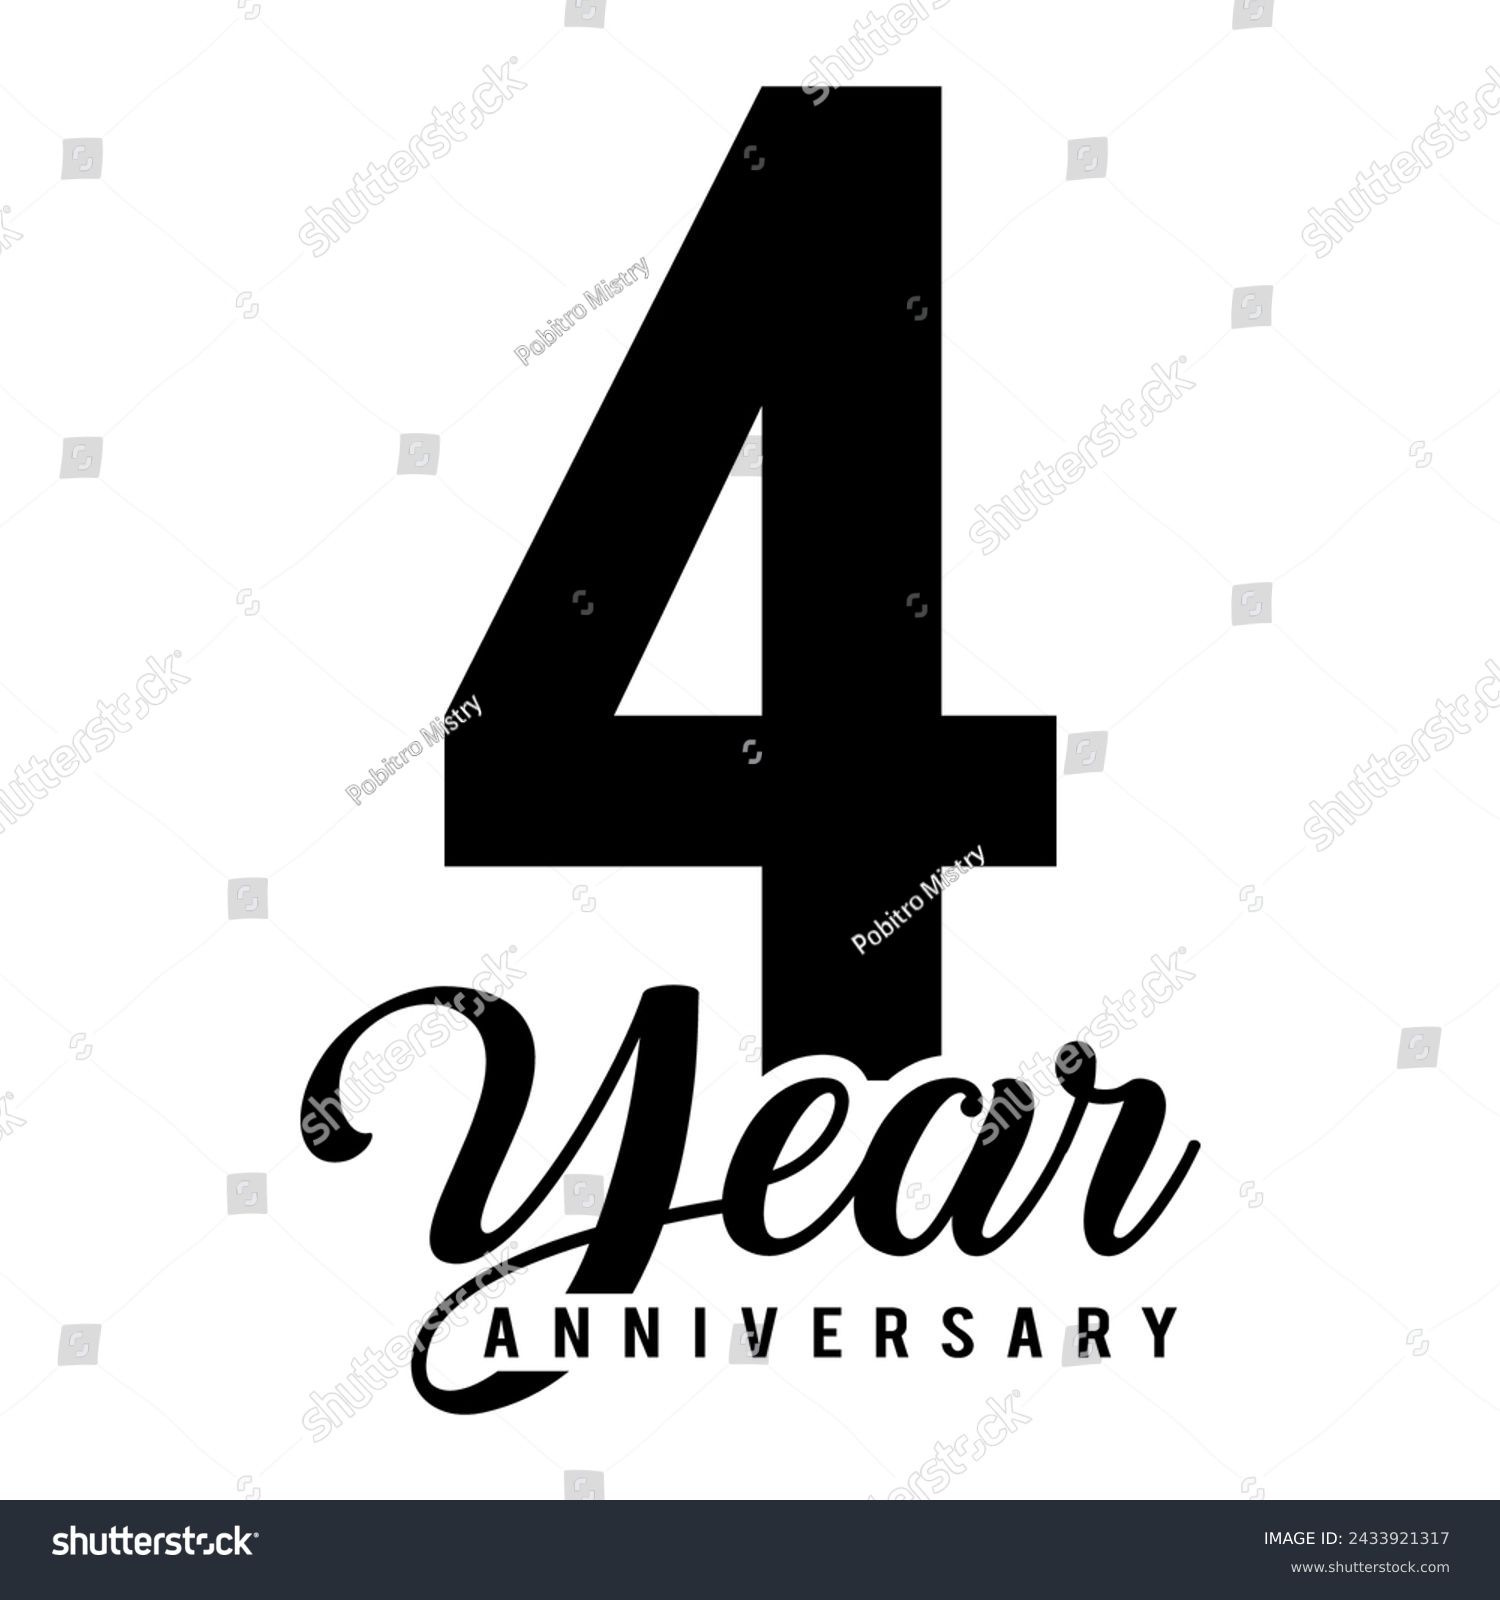 SVG of 4 Year Anniversary wedding wish lettering text vector illustration. svg